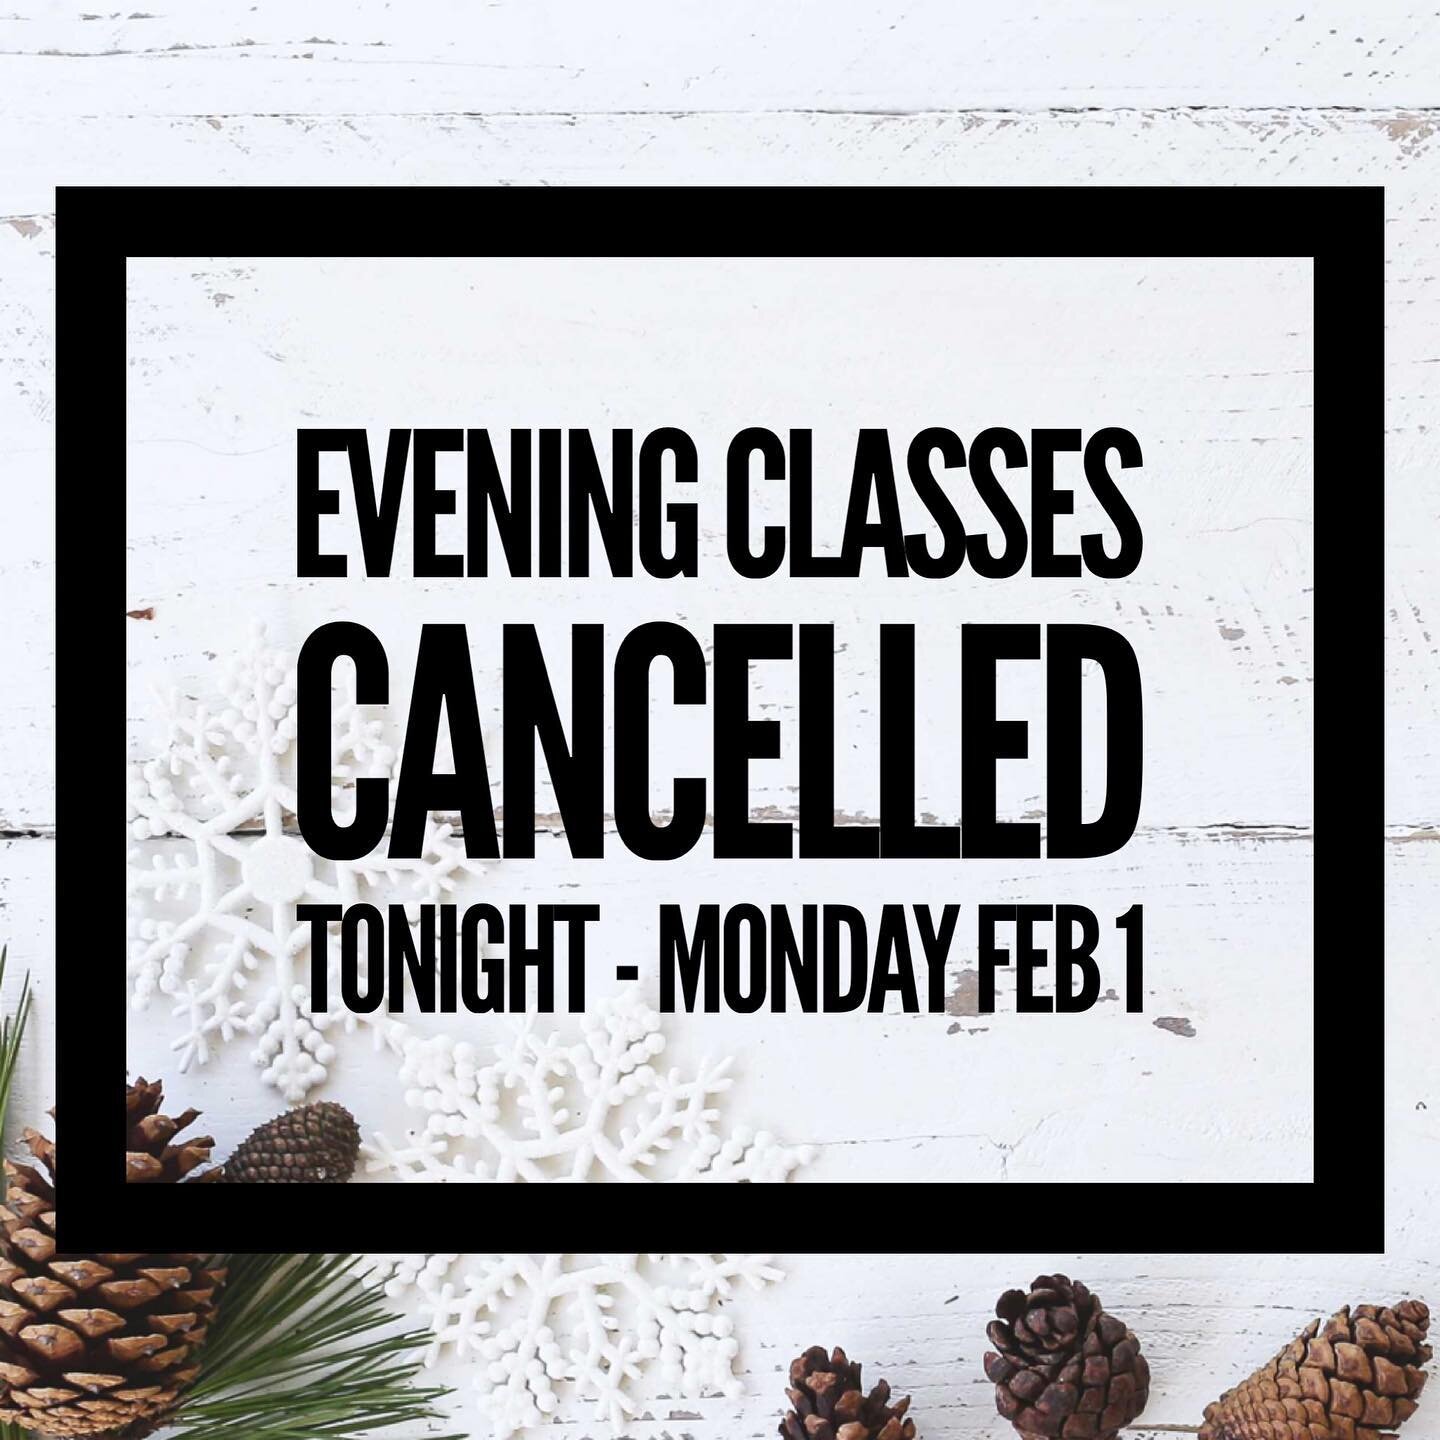 With continued snow and freezing over in the forecast for this afternoon and evening, we will be canceling all evening classes.